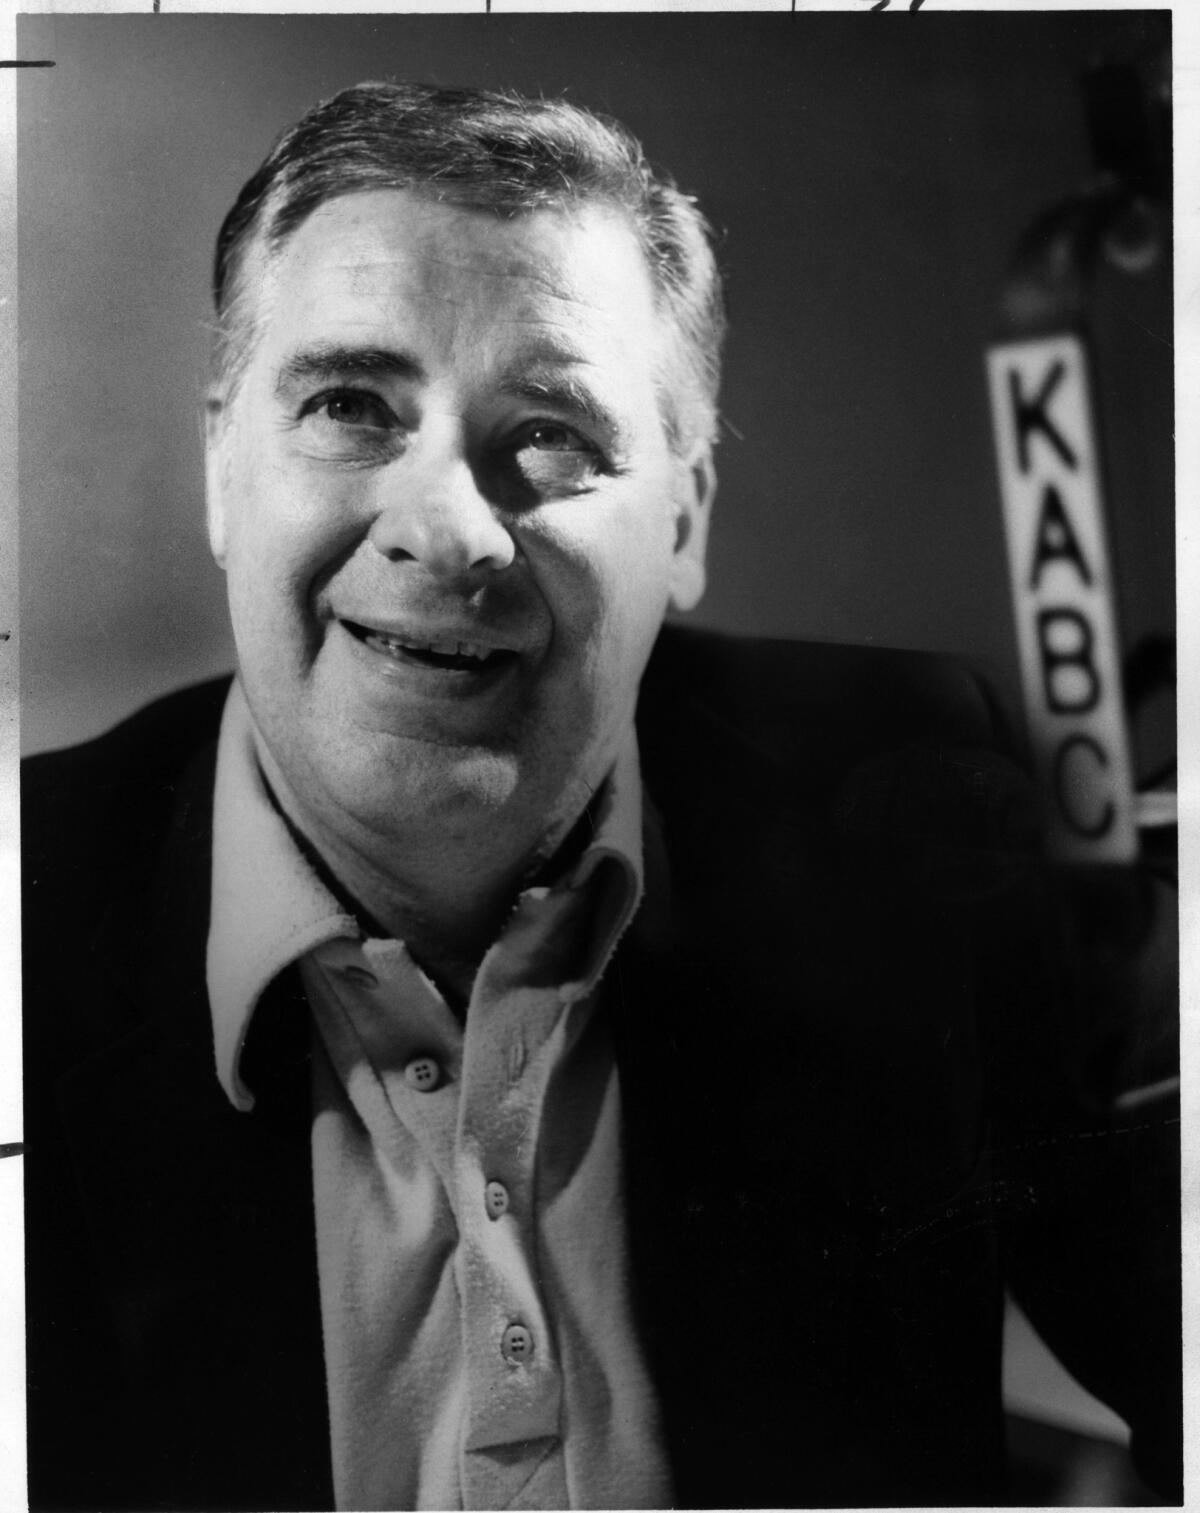 Ray Briem, a longtime Los Angeles radio talk-show host know for his conservative views, in an undated photo.